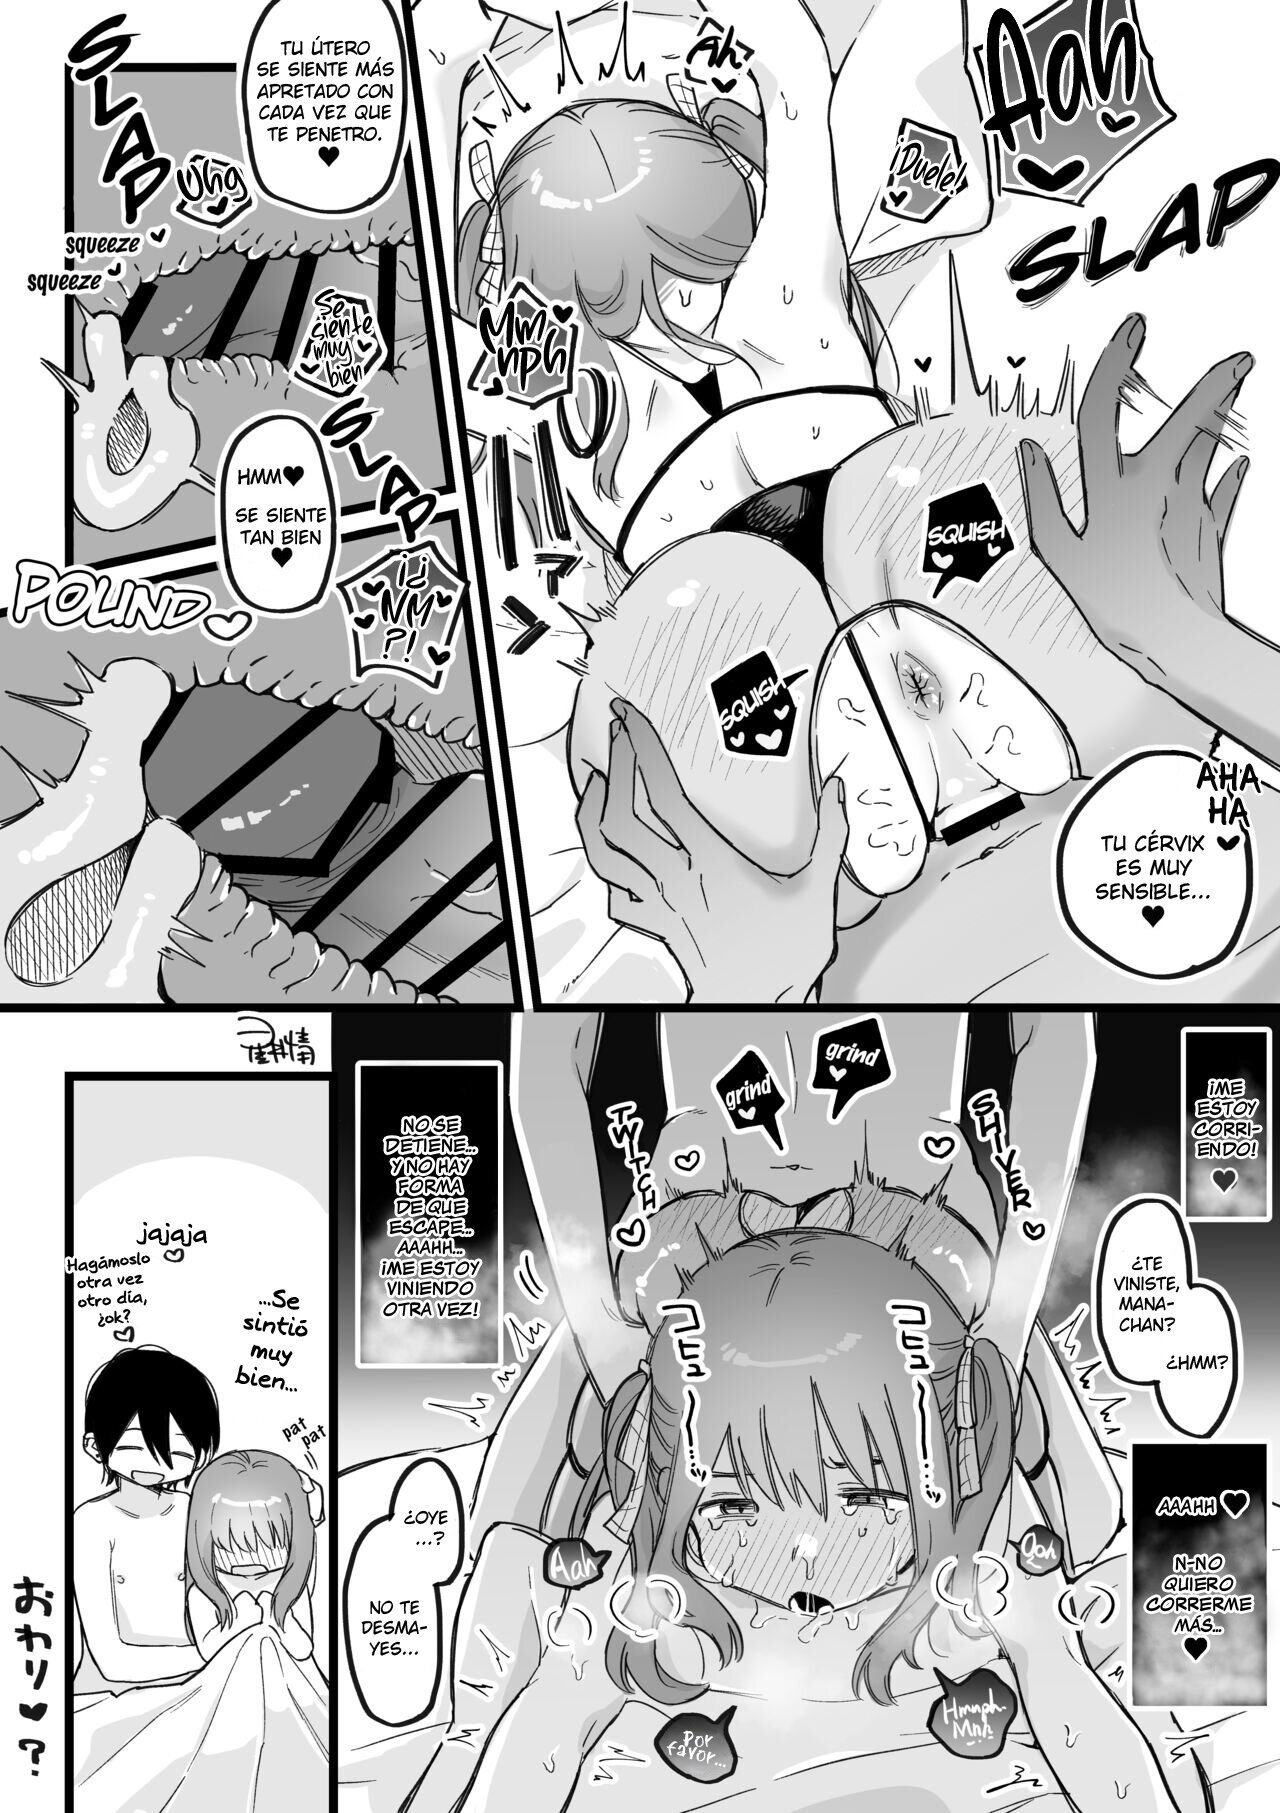 Hime-chan Total Defeat y Hime-chan Returns - 7